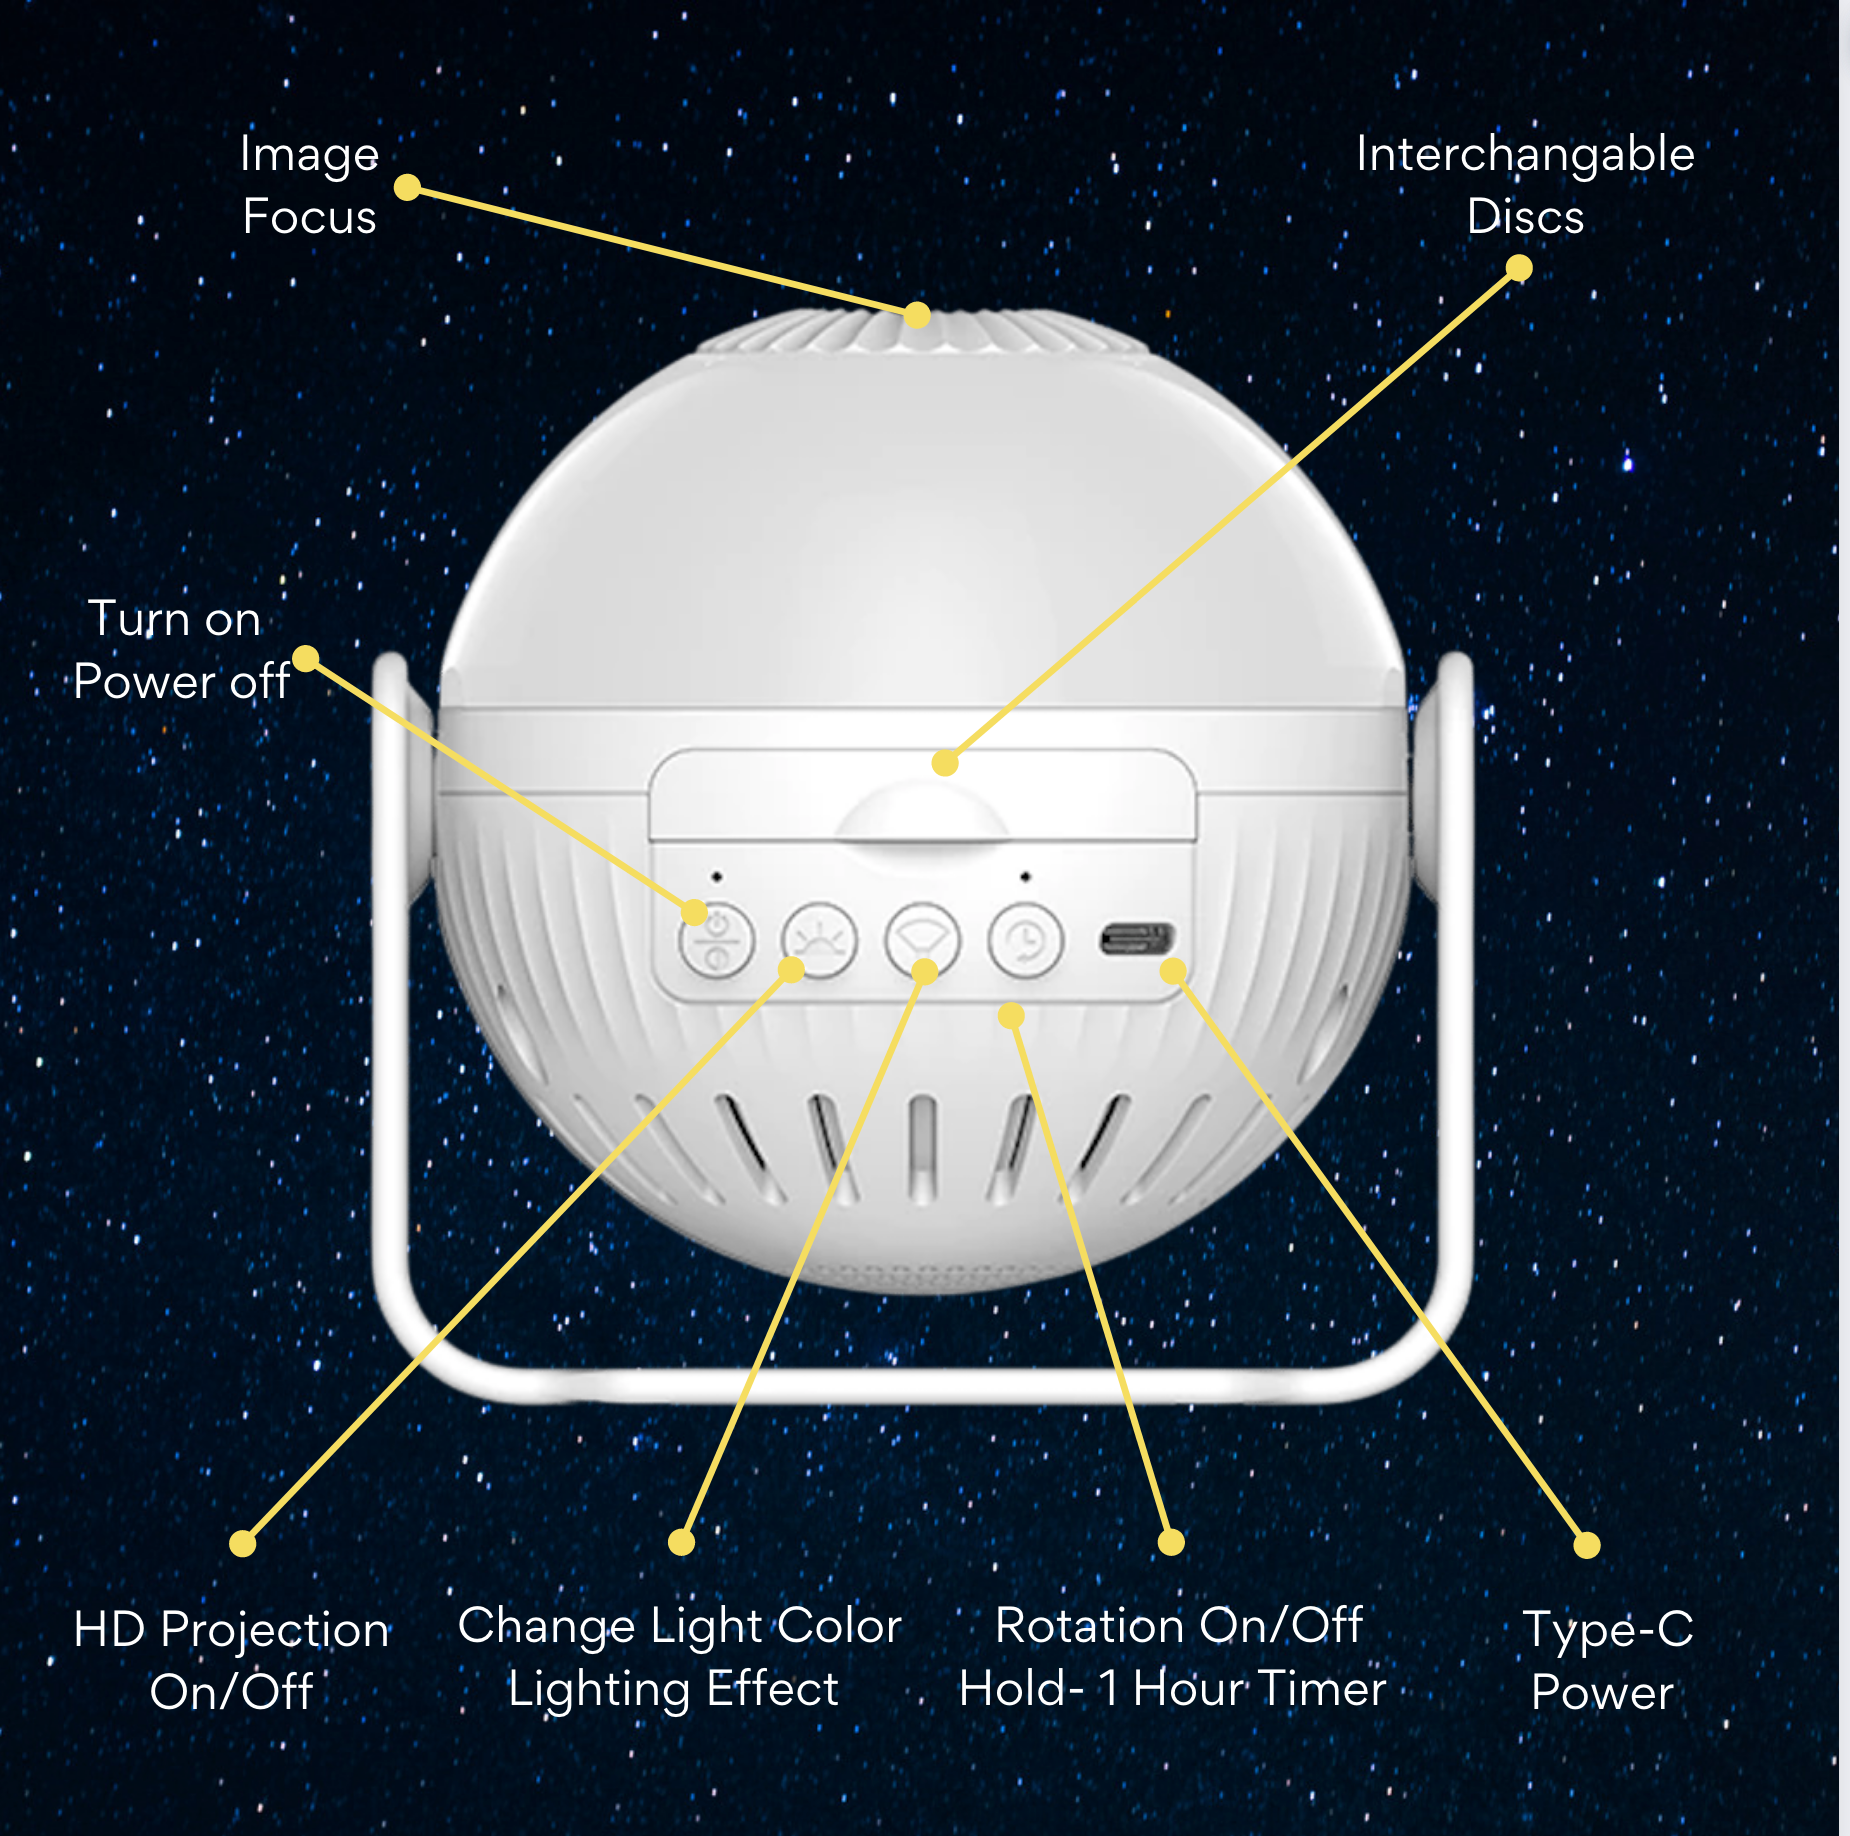 Image of glorilight features with Glorilight front and center with dark sky and stars on the background.  The features listed in white text include: Image Focus, Interchangeable discs, Turn on Power off, HD Projection on/off, change light color, lighting effect, rotation on/off hold 1 hour timer, type c power. 